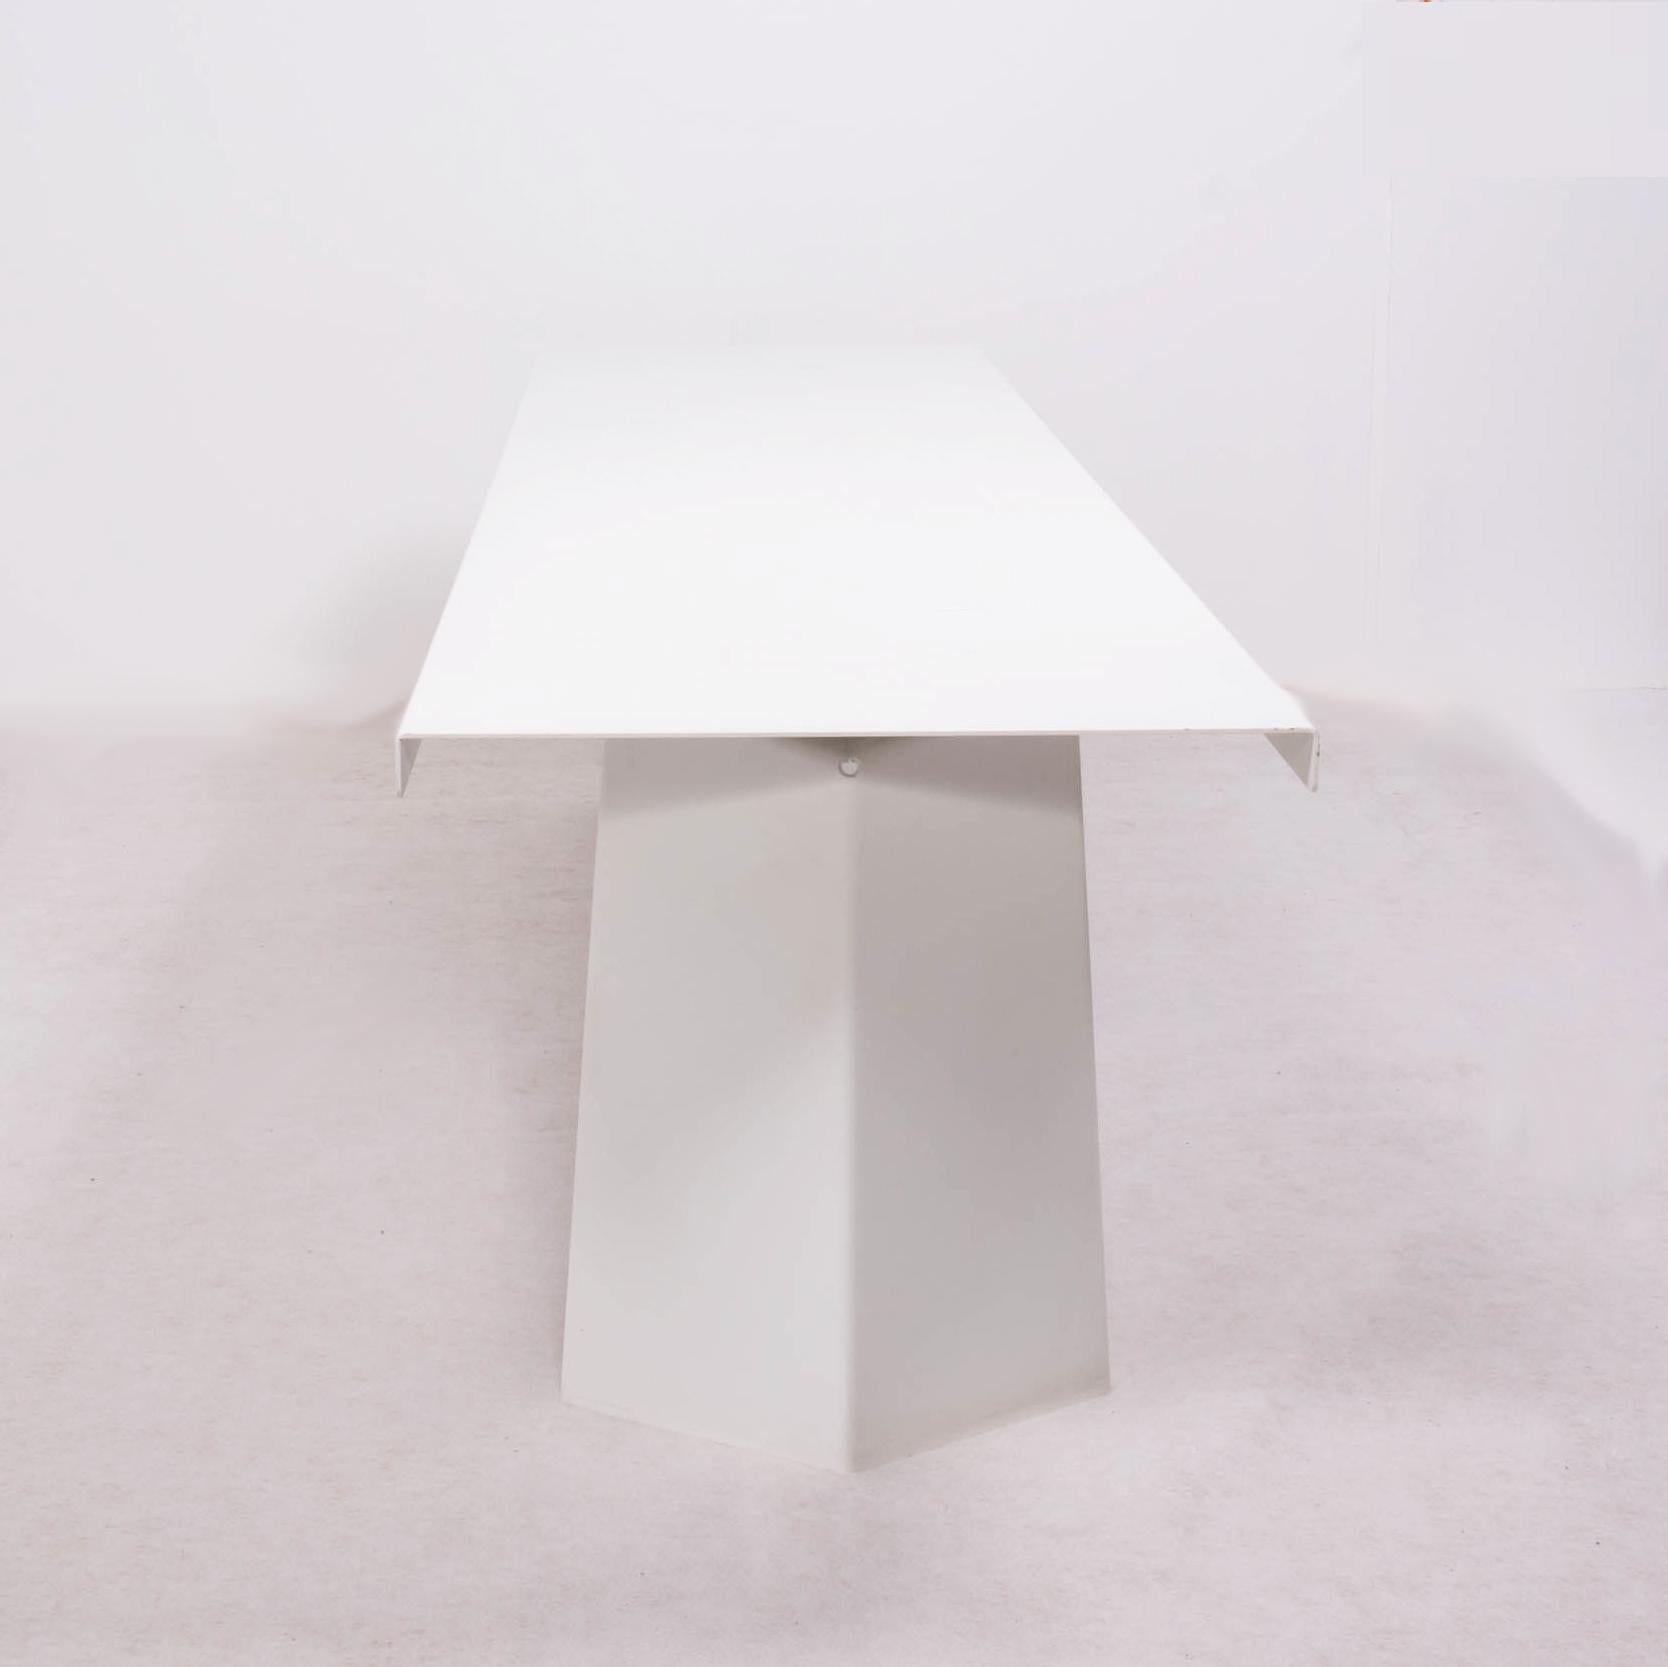 A Konstantin Grcic for ClassiCon design Classic.
 Finished in sheet steel with a fine-texture white powder coating, the modern Industrial Pallas dining table sits atop two wide angled legs, creating a bold silhouette. 
The bright, modern aesthetic